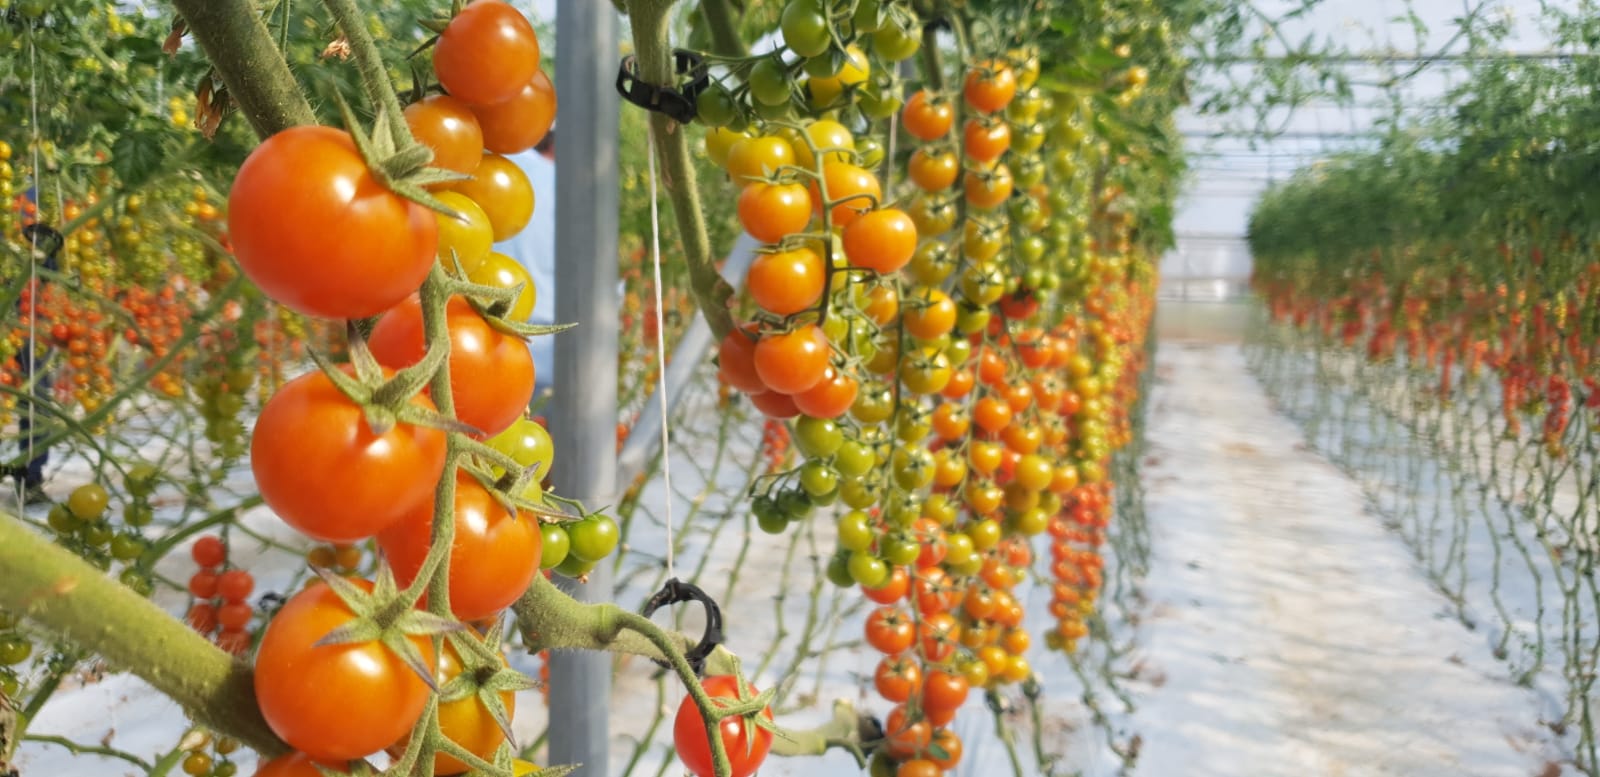 Tomatoes growing on a vine in a farm